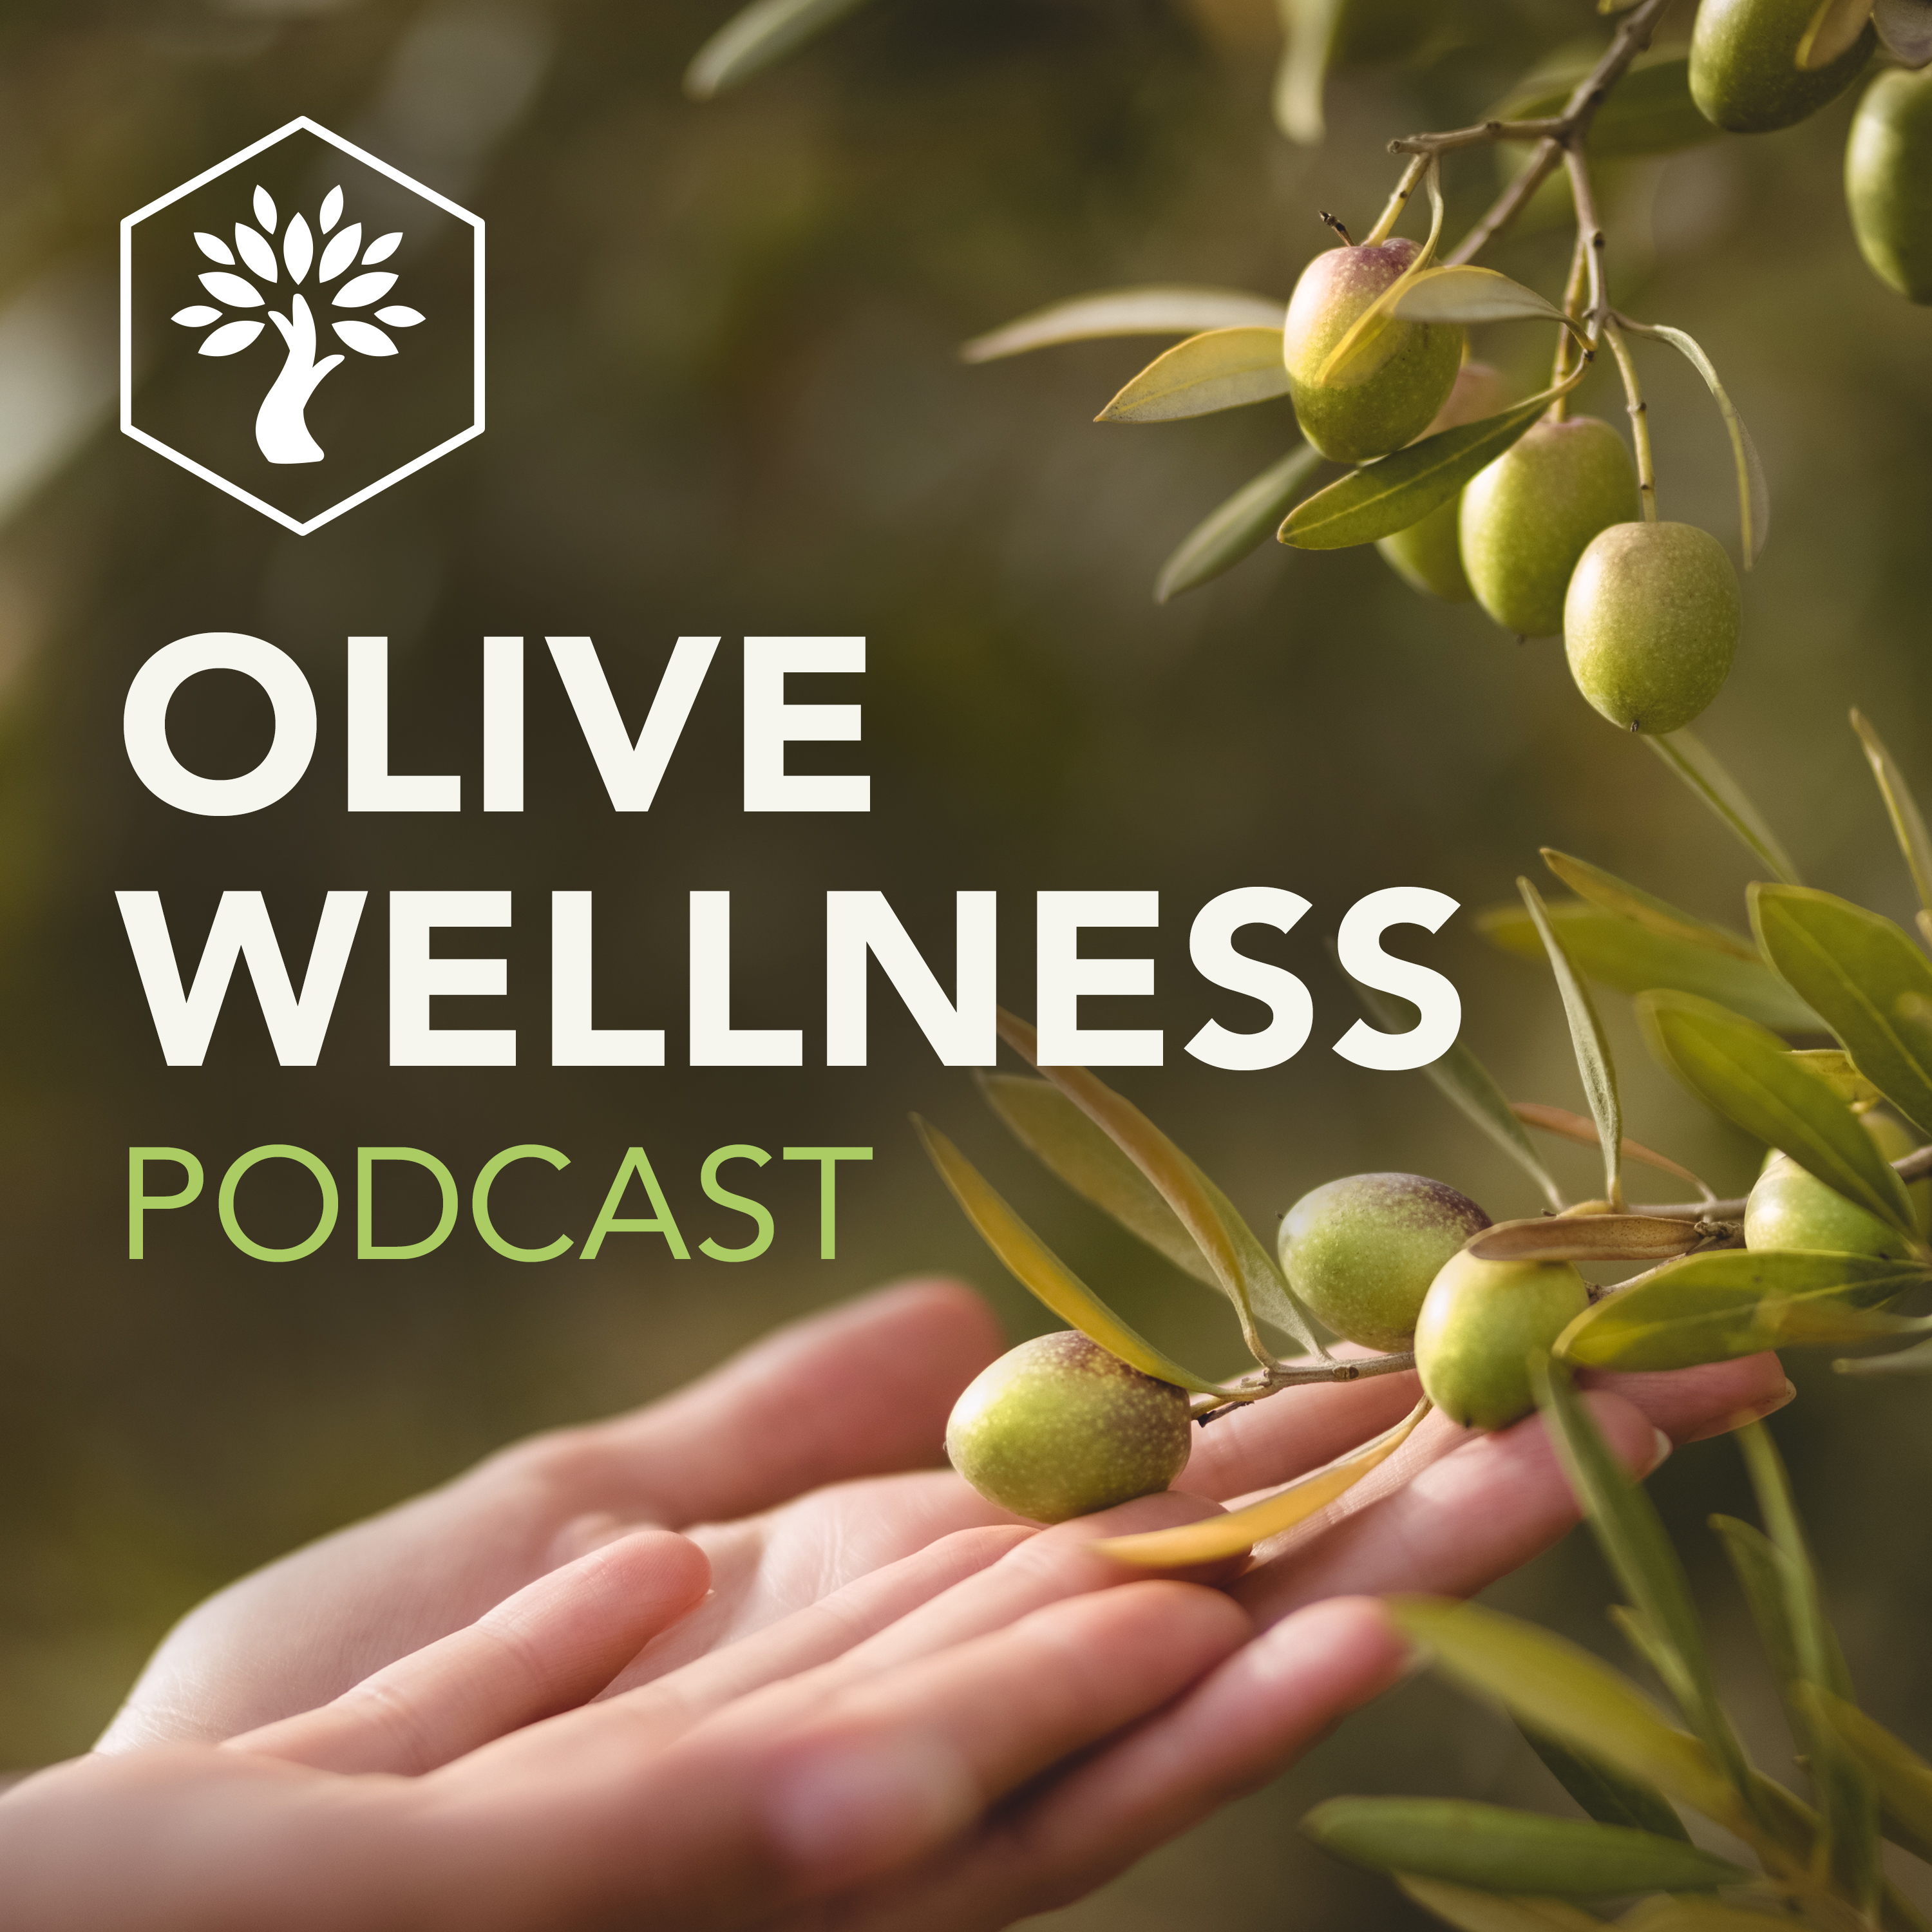 Olive Wellness Podcast is coming soon